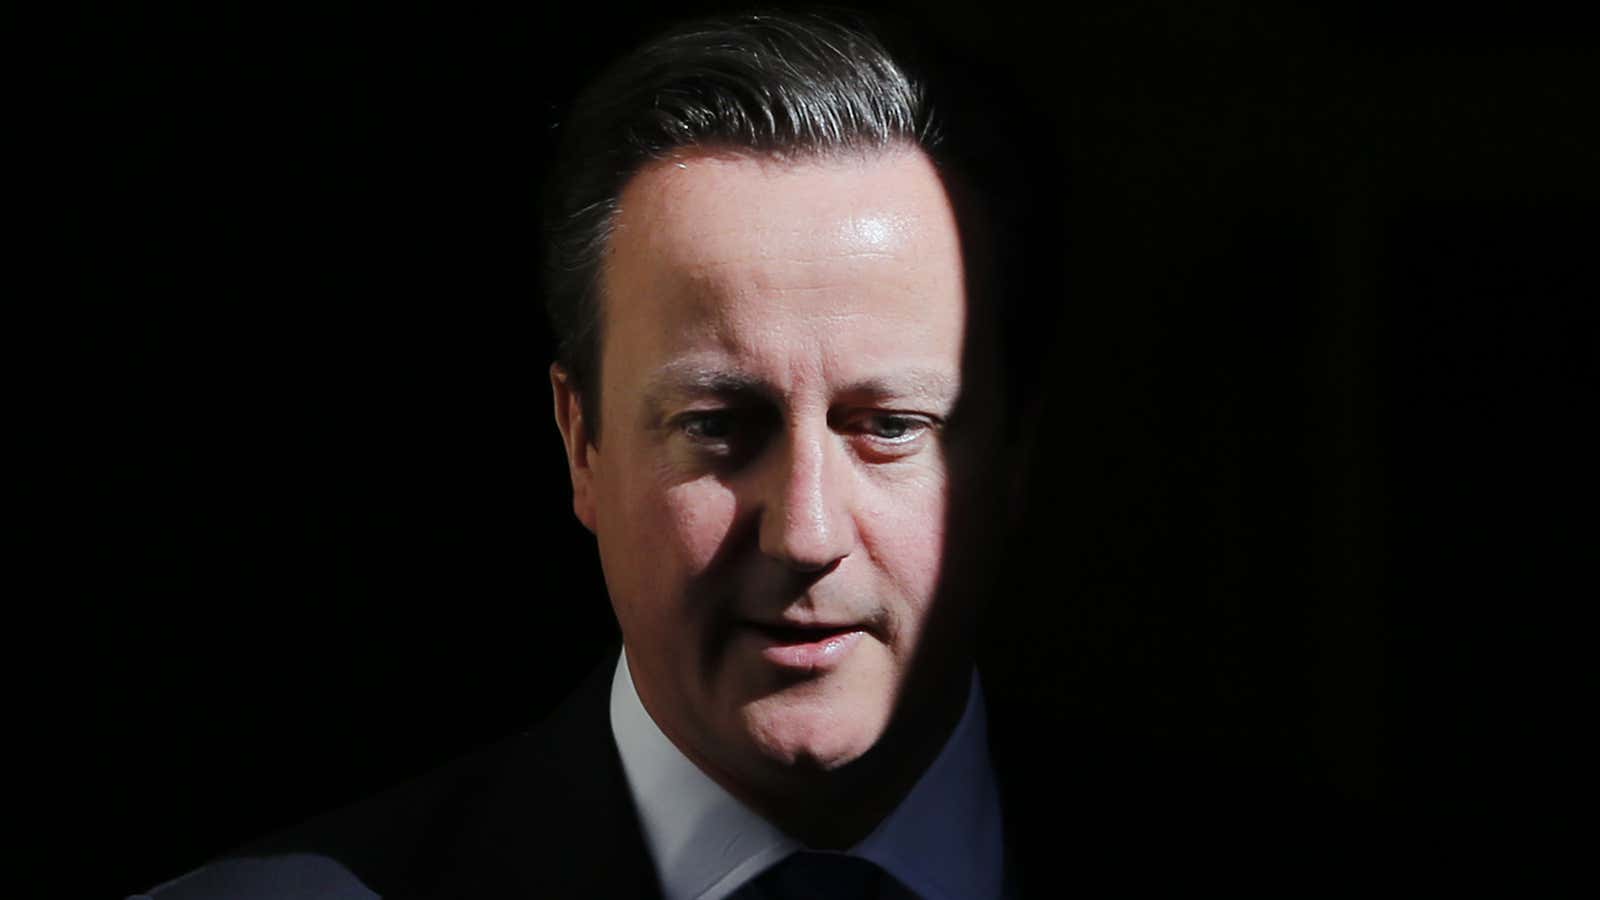 The UK economy seems to be moving out of a dark period. Will Cameron?